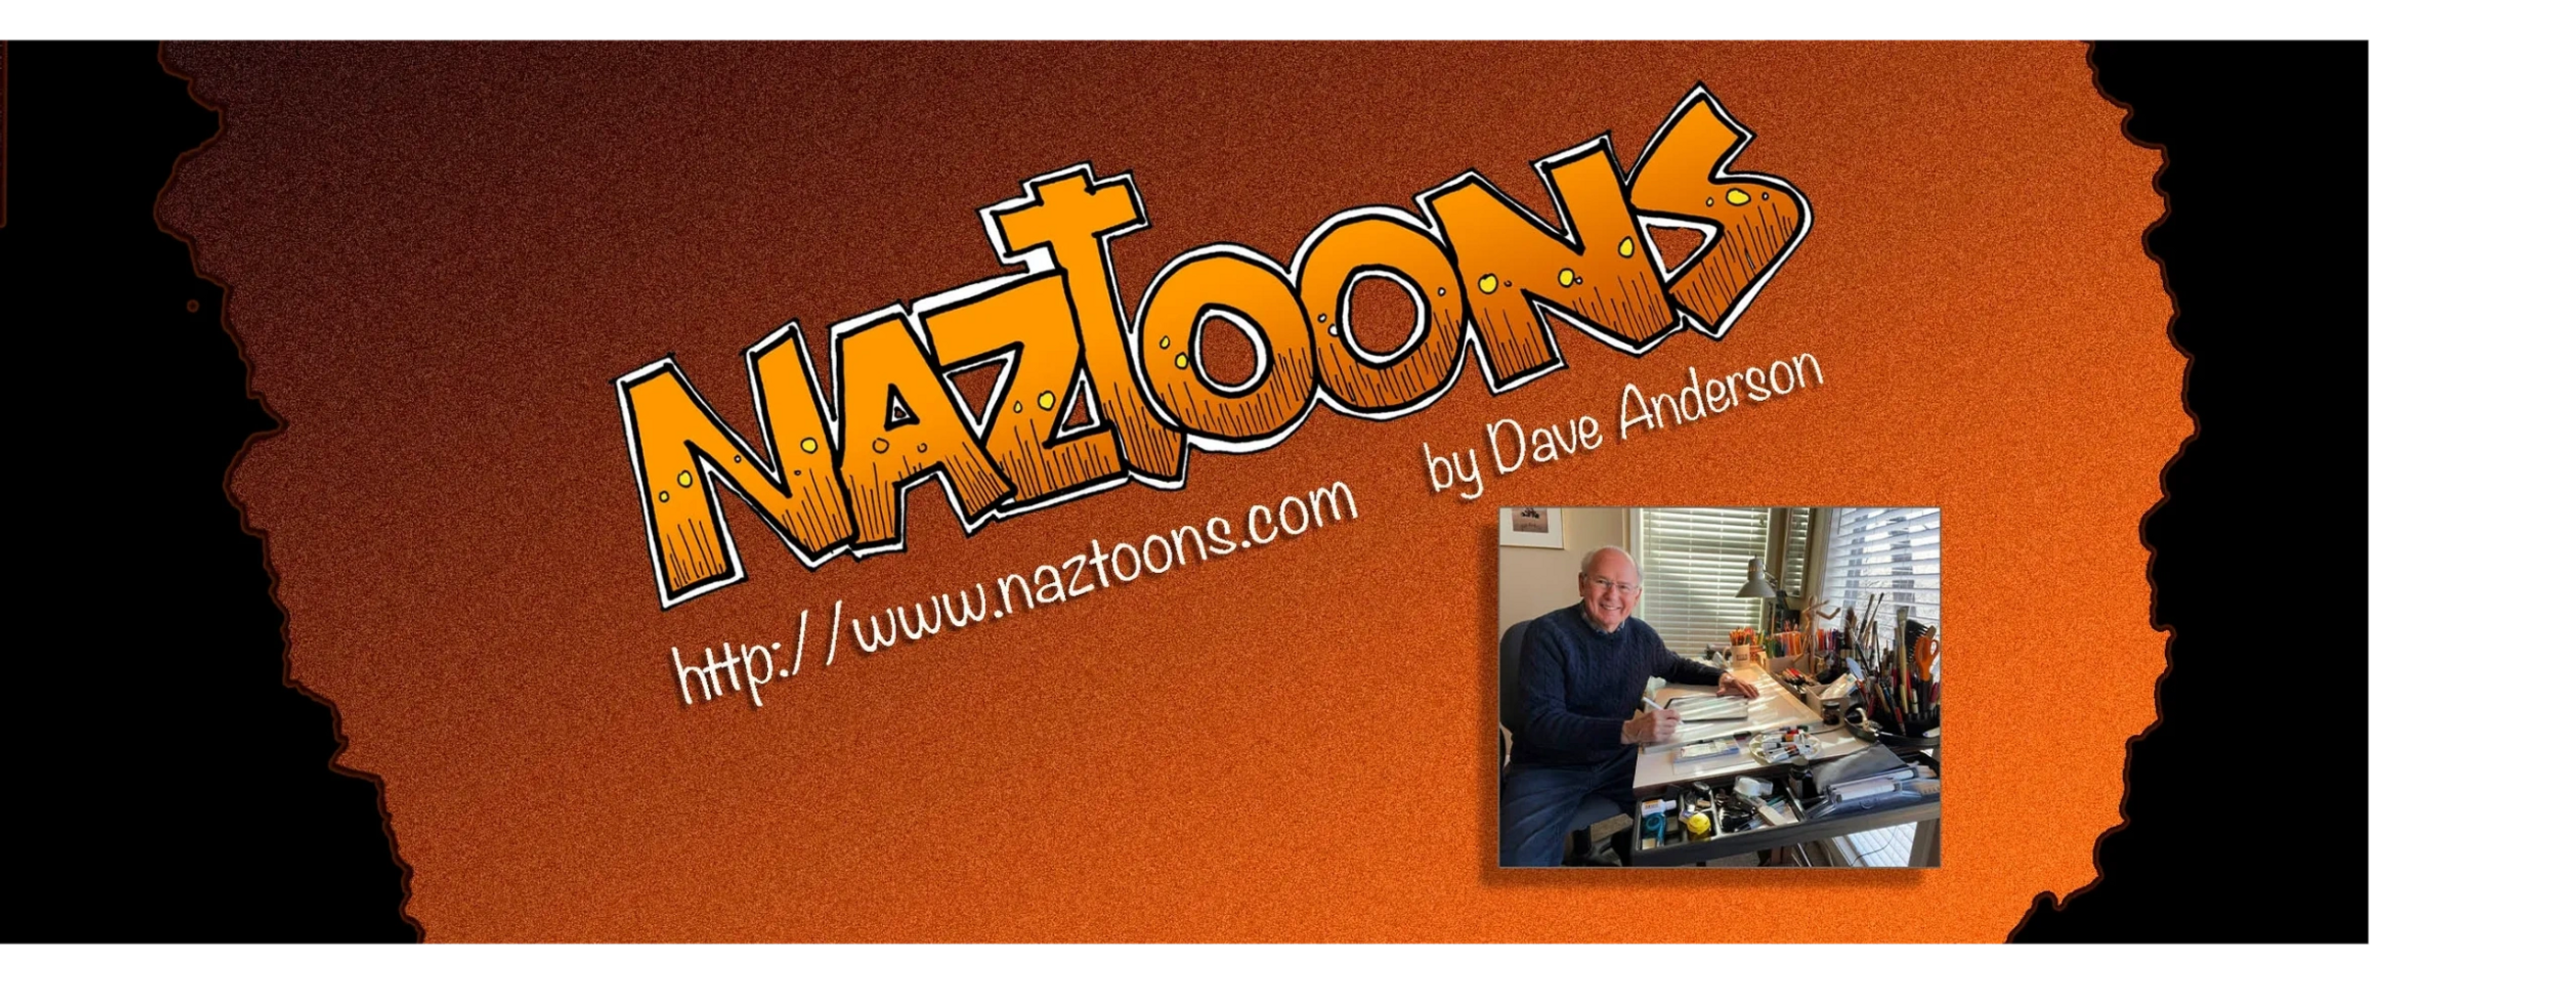 Naztoons logo, naztoons,www.naztoons.com, Dave Anderson